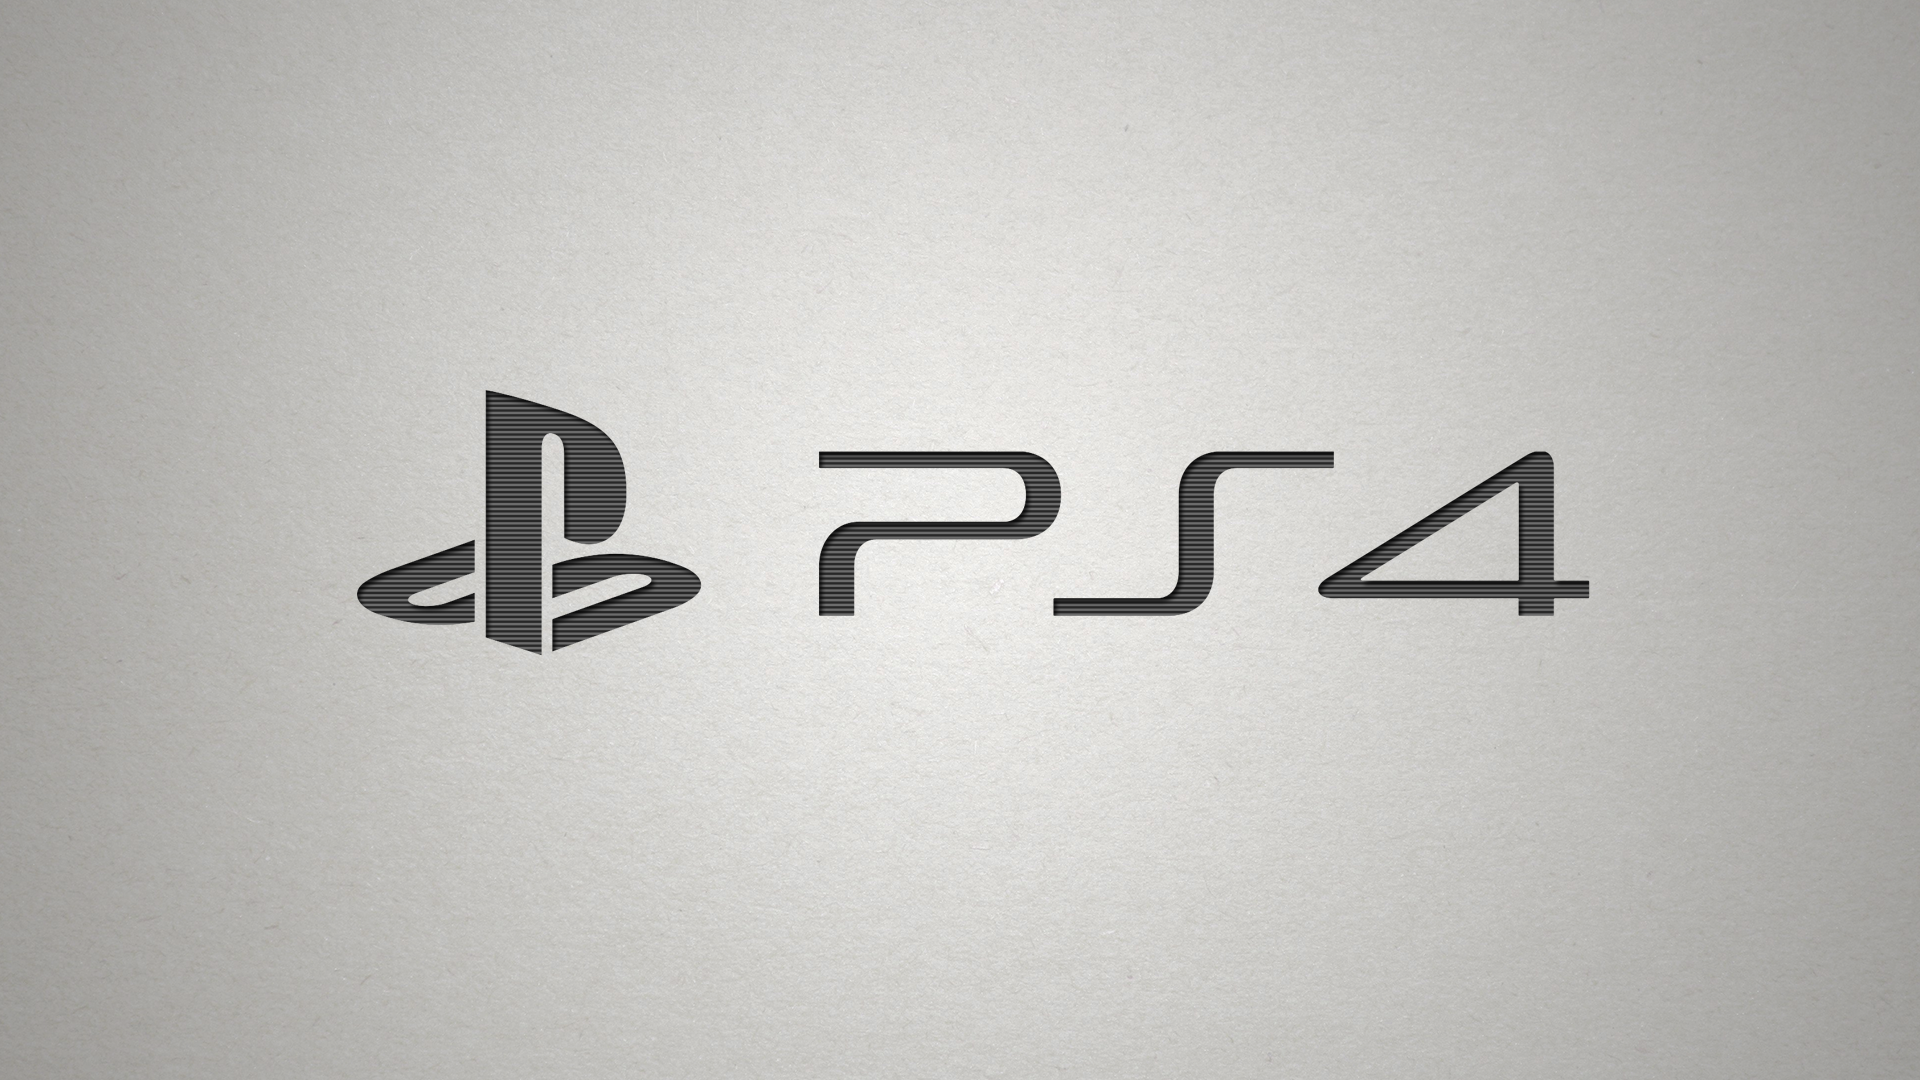 Video Game Playstation 4 1920x1080